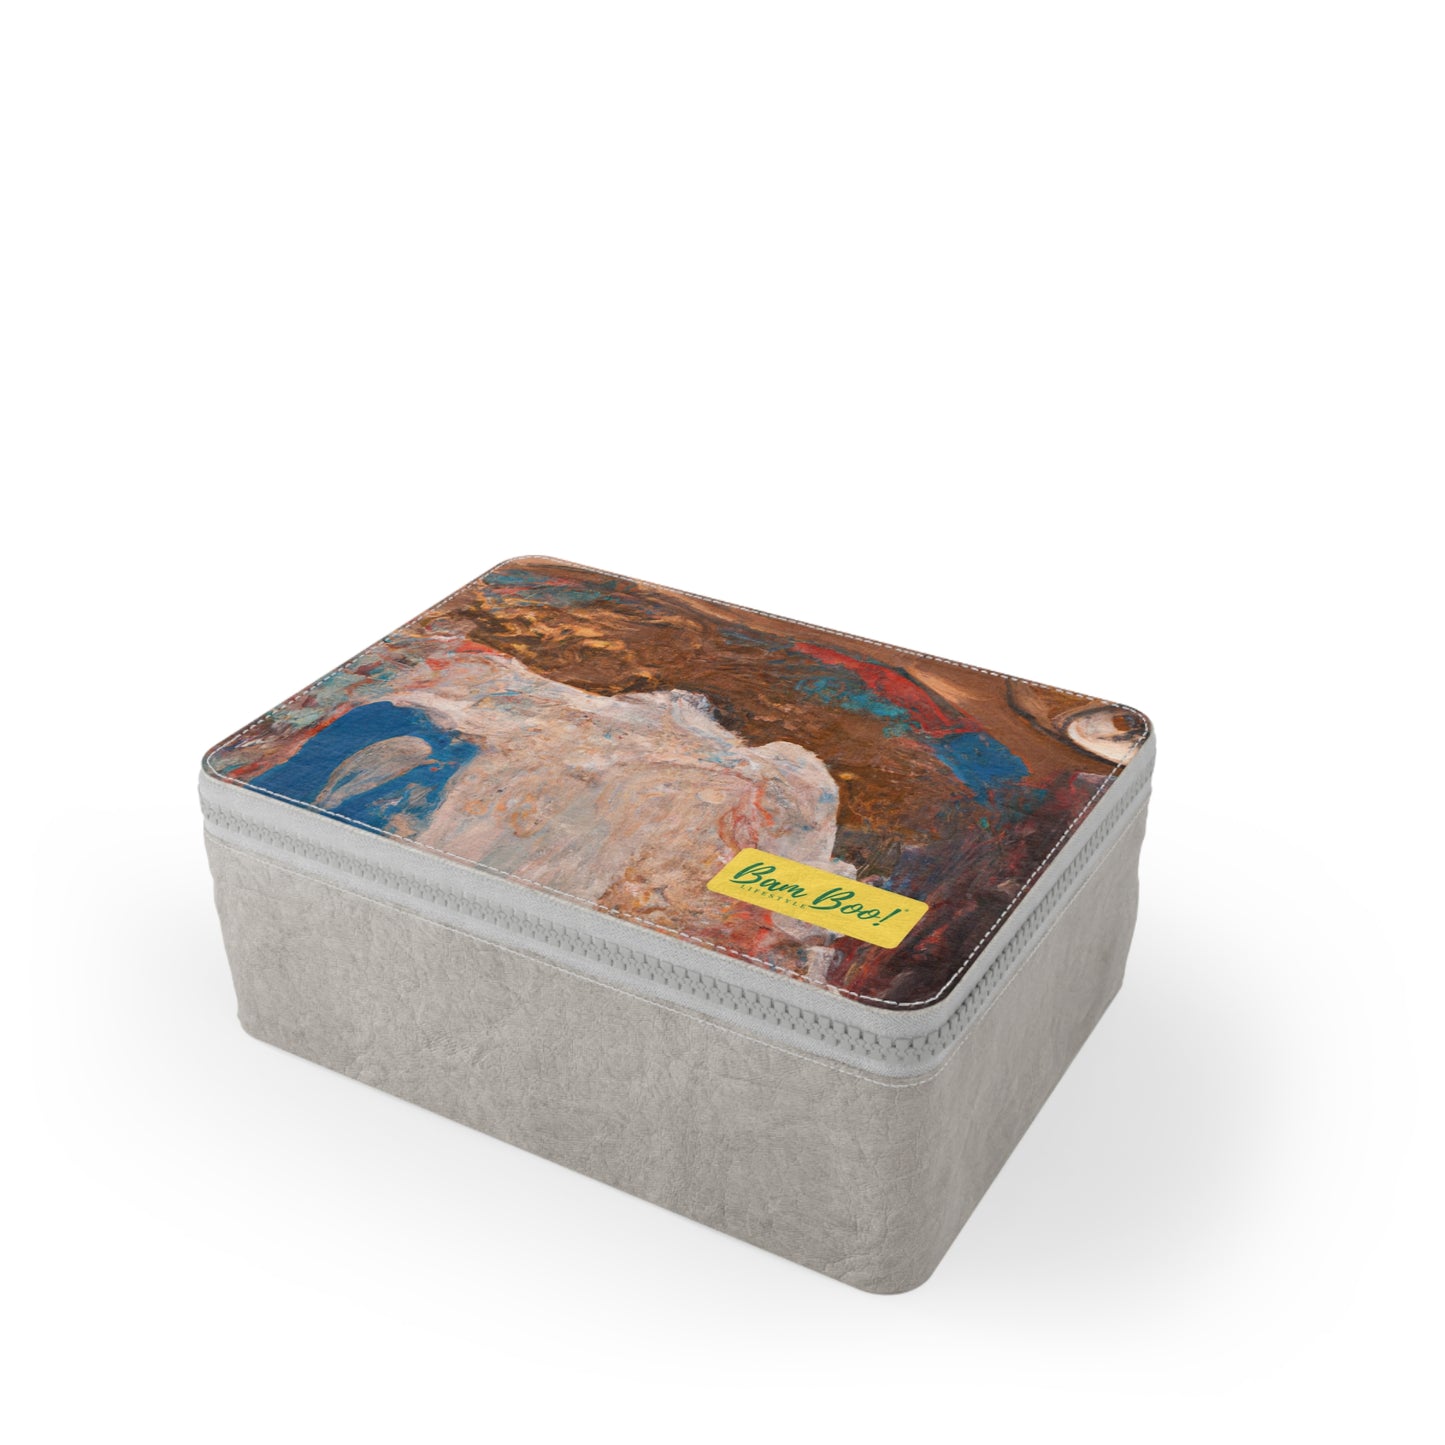 "Mixed Media Expression: Exploring Nature Through Abstract Landscapes" - Bam Boo! Lifestyle Eco-friendly Paper Lunch Bag